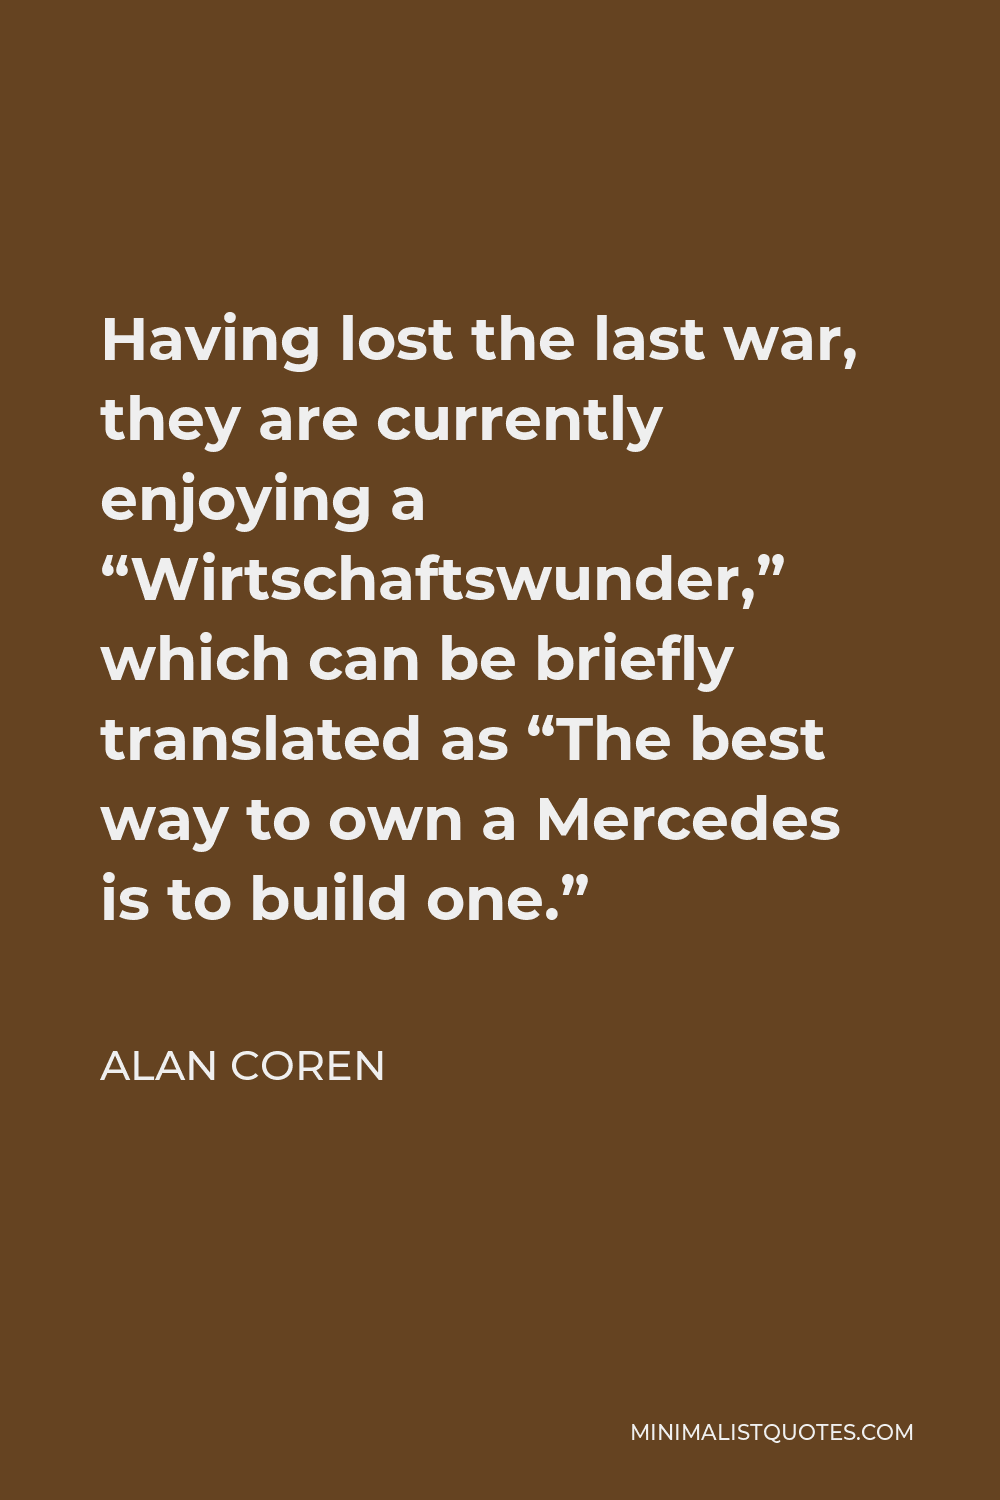 Alan Coren Quote - Having lost the last war, they are currently enjoying a “Wirtschaftswunder,” which can be briefly translated as “The best way to own a Mercedes is to build one.”